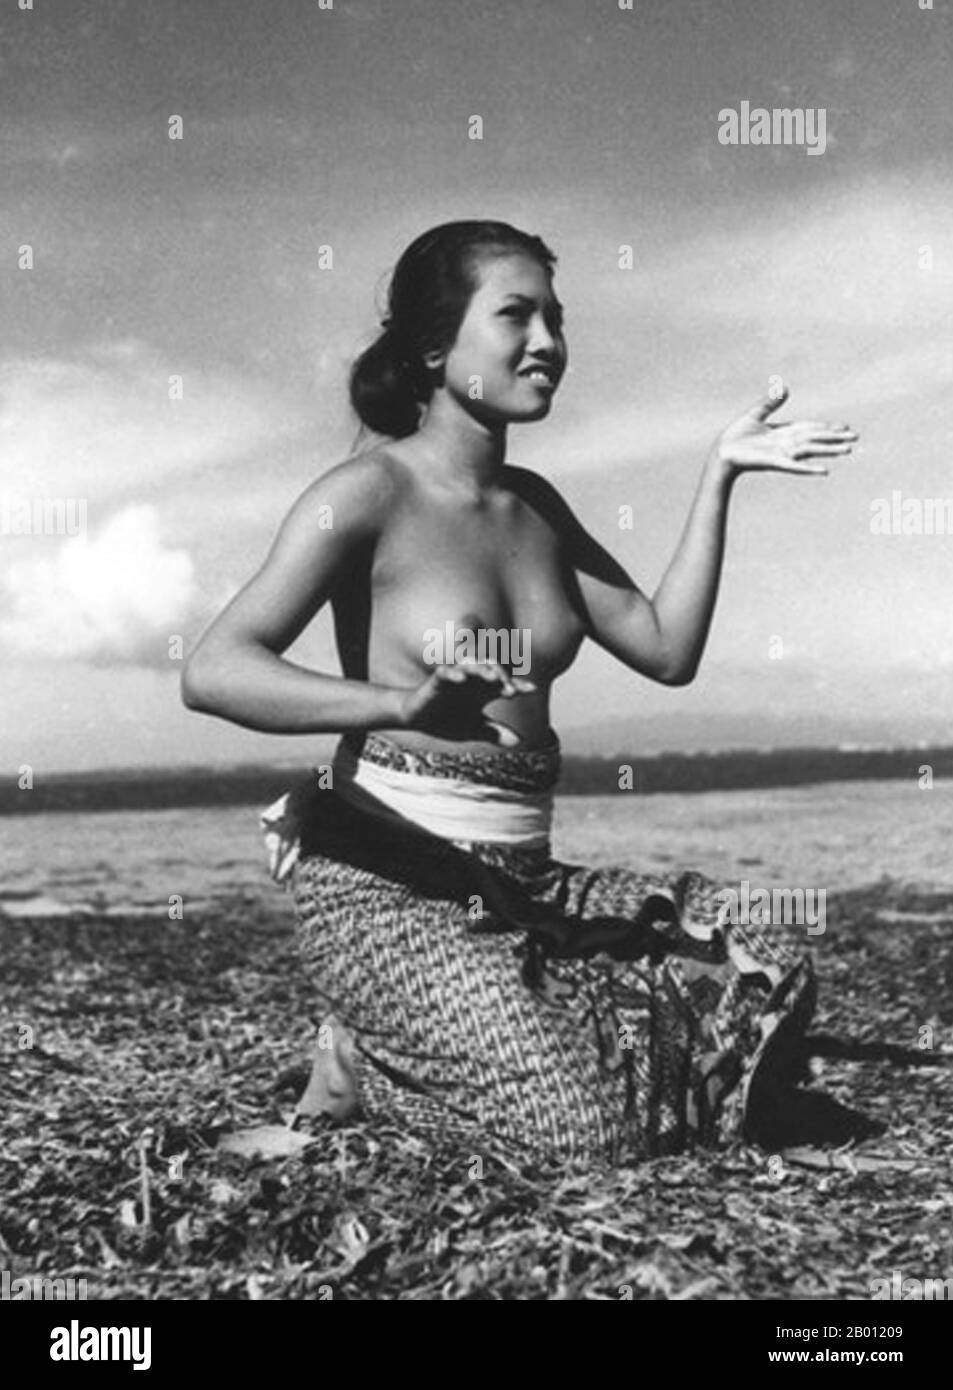 Indonesia: Young Balinese woman practicing classical dance movements by the sea shore, c. 1935.  Balinese dance is a very ancient dance tradition that is a part of the religious and artistic expression among the Balinese people, native to Bali island, Indonesia. Balinese dance is dynamic, angular and intensely expressive. The Balinese dancers express the story of dance-drama through the whole bodily gestures; fingers, hands and body gestures to head and eyes movements. Stock Photo